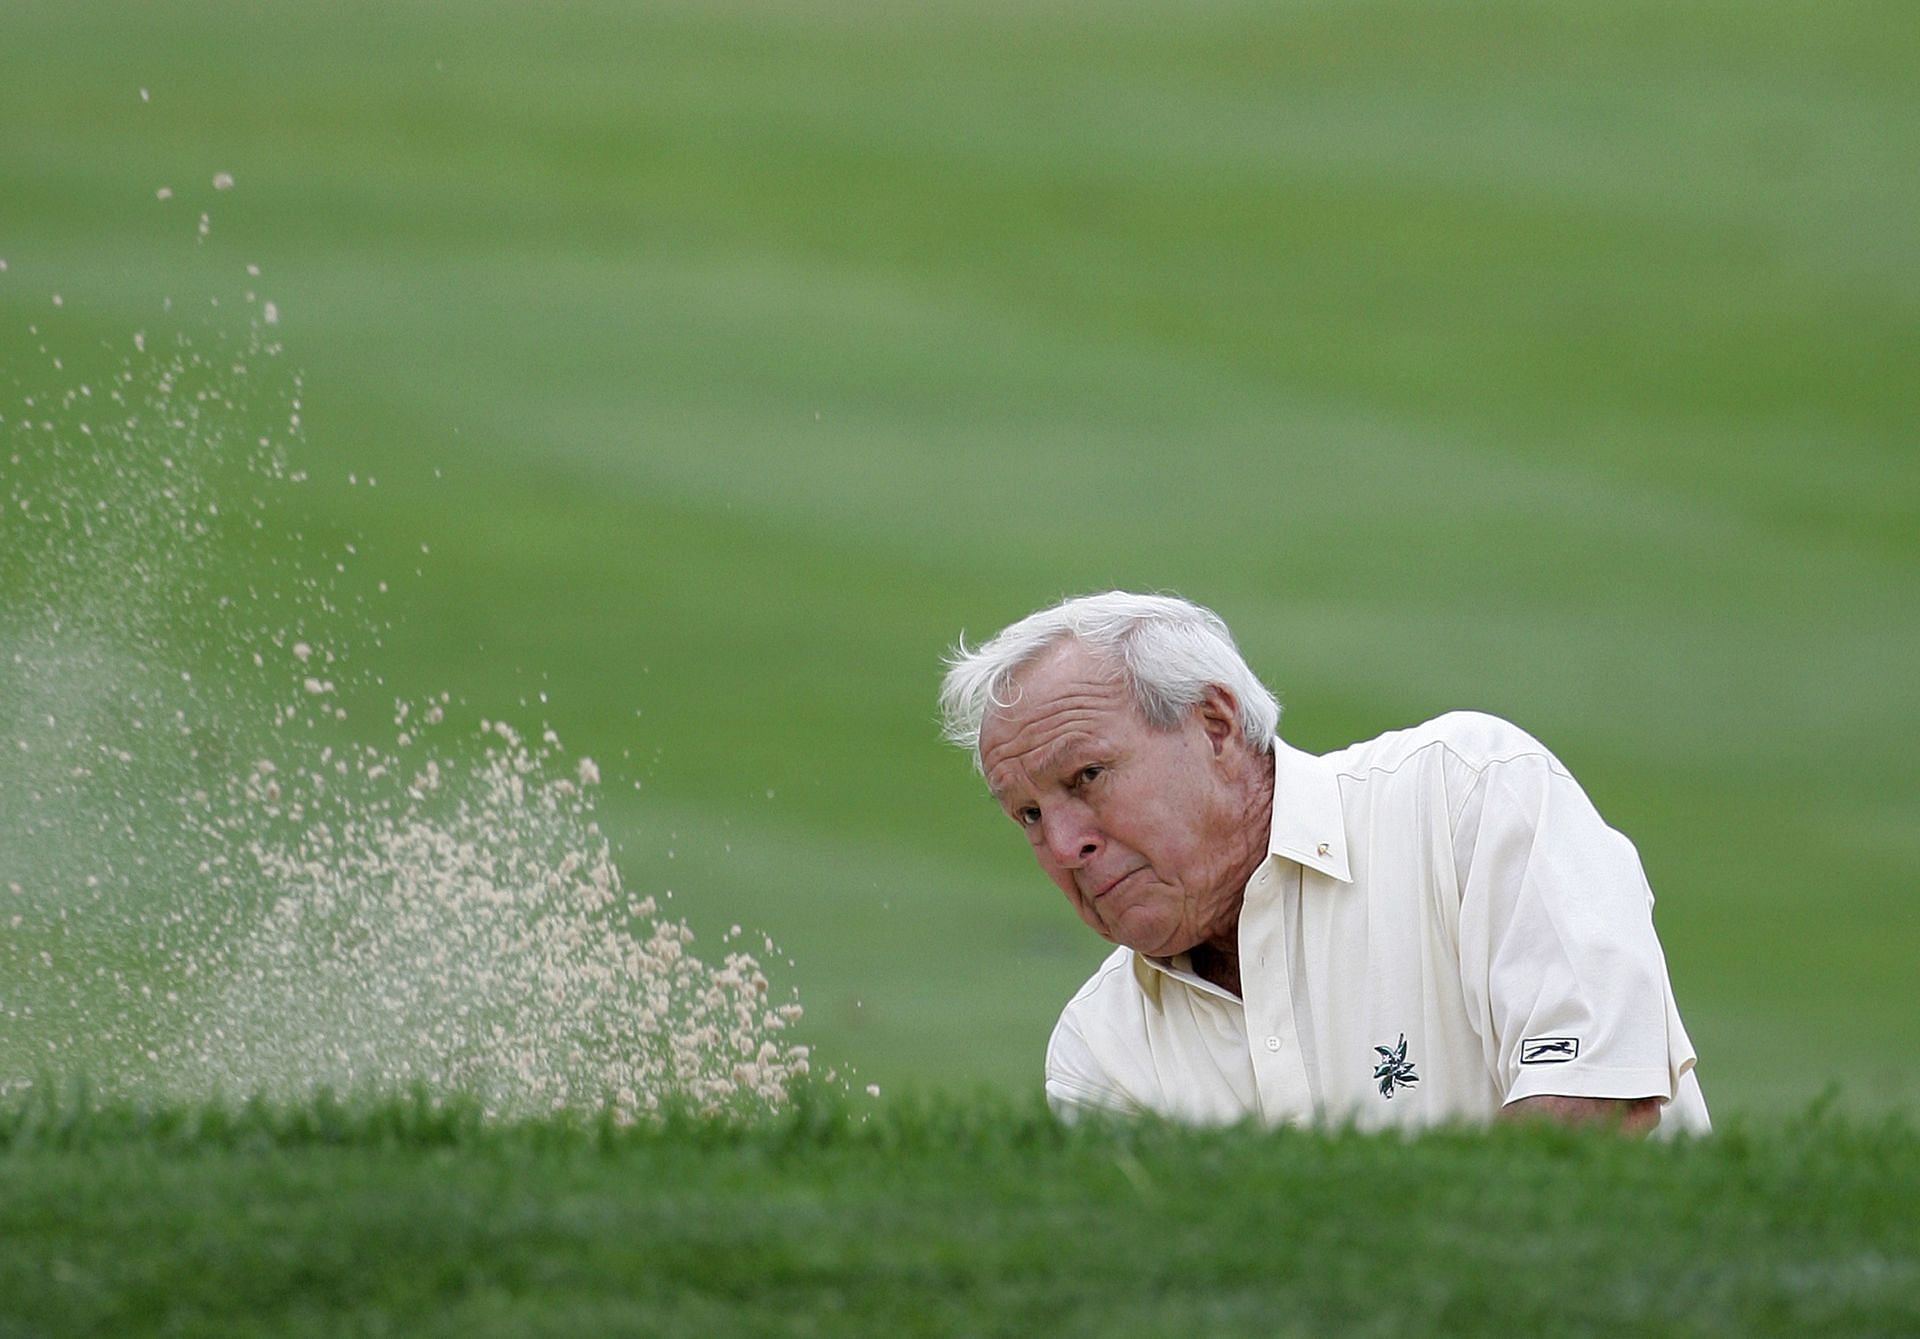 Arnold Palmer at the Champions Tour - 2006 Constellation Energy Classic - First Round (Image via Getty)